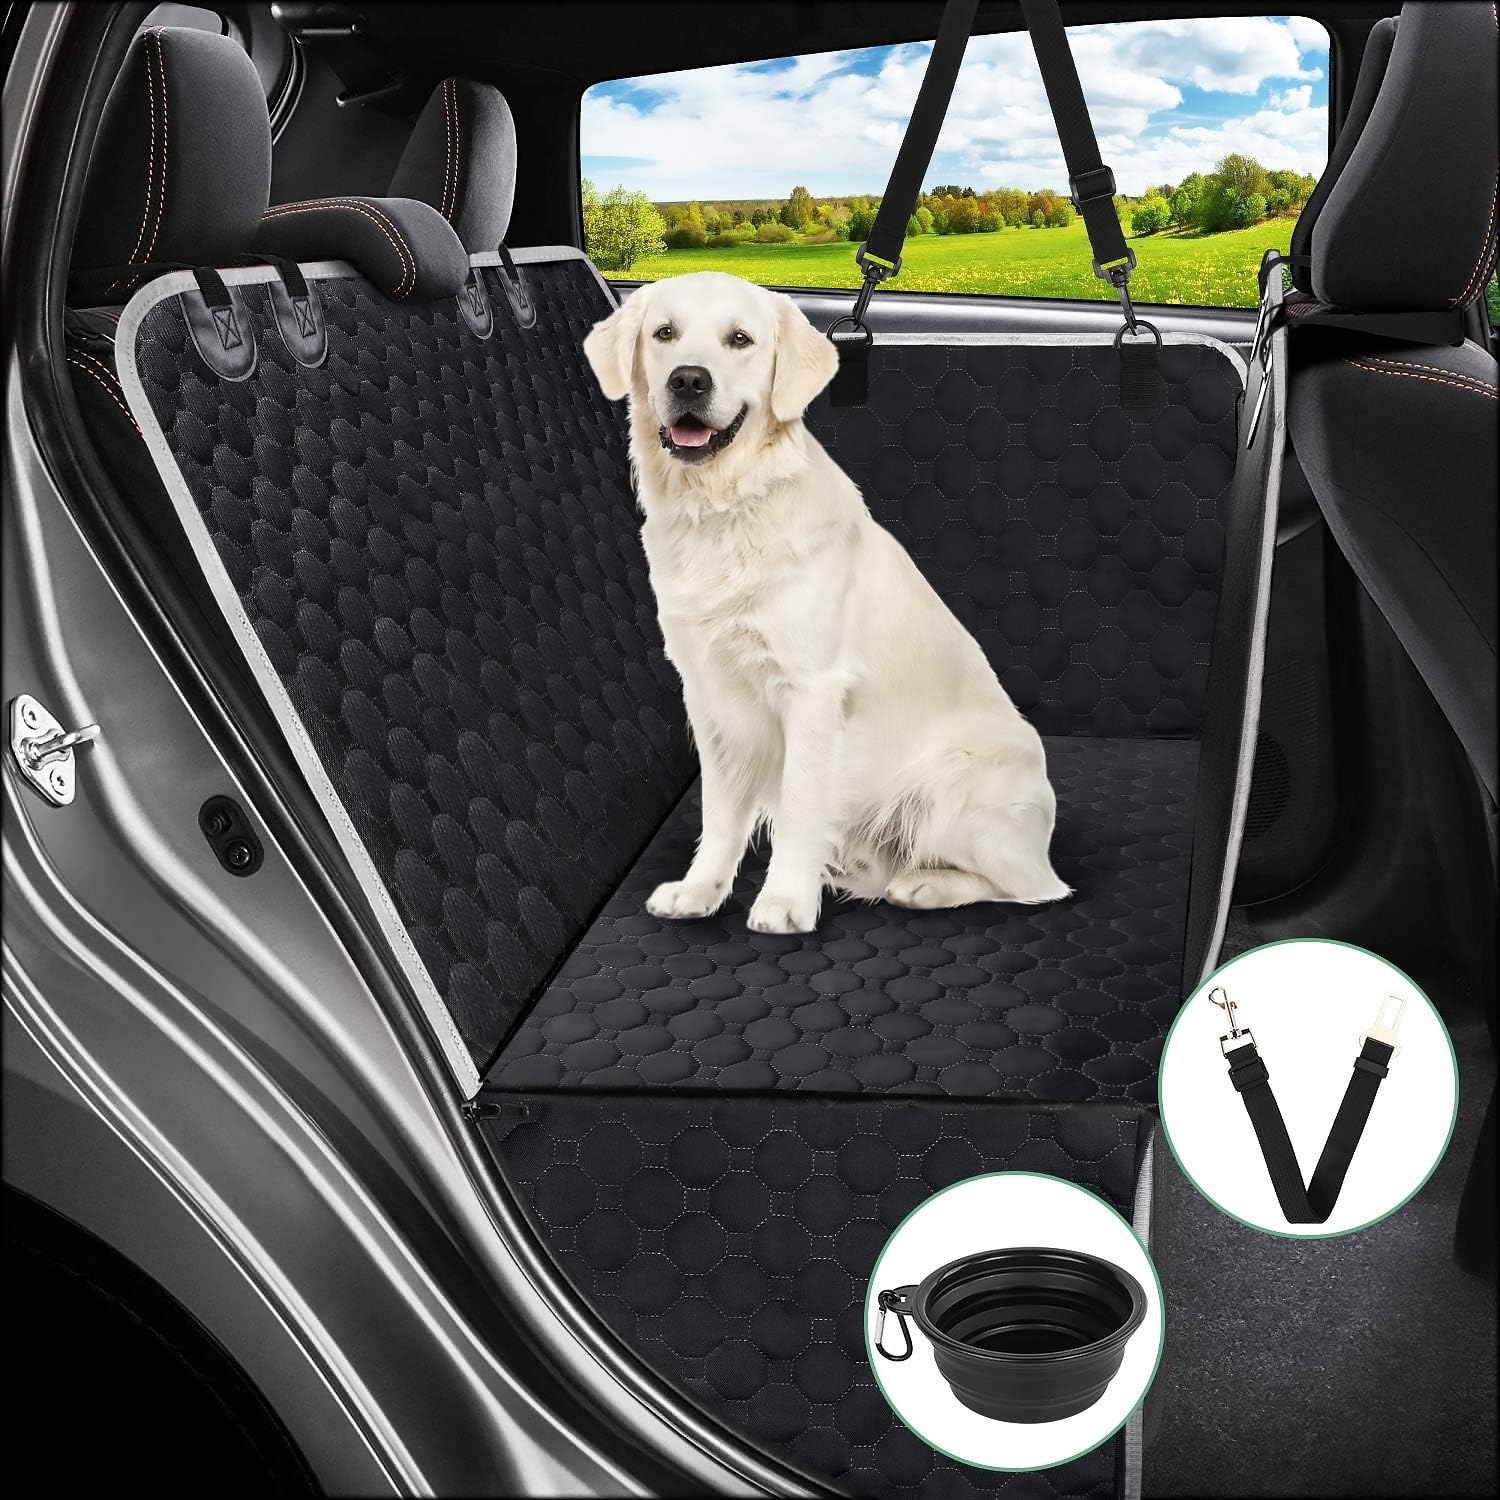 Mancro Car Seat Covers for Dogs, Car Seat Cover for Back Seat with Side Flaps, Convertible Scratch Proof Pet Seat Cover Hammock, Durable Soft Seat Protector for Cars Trucks SUVs